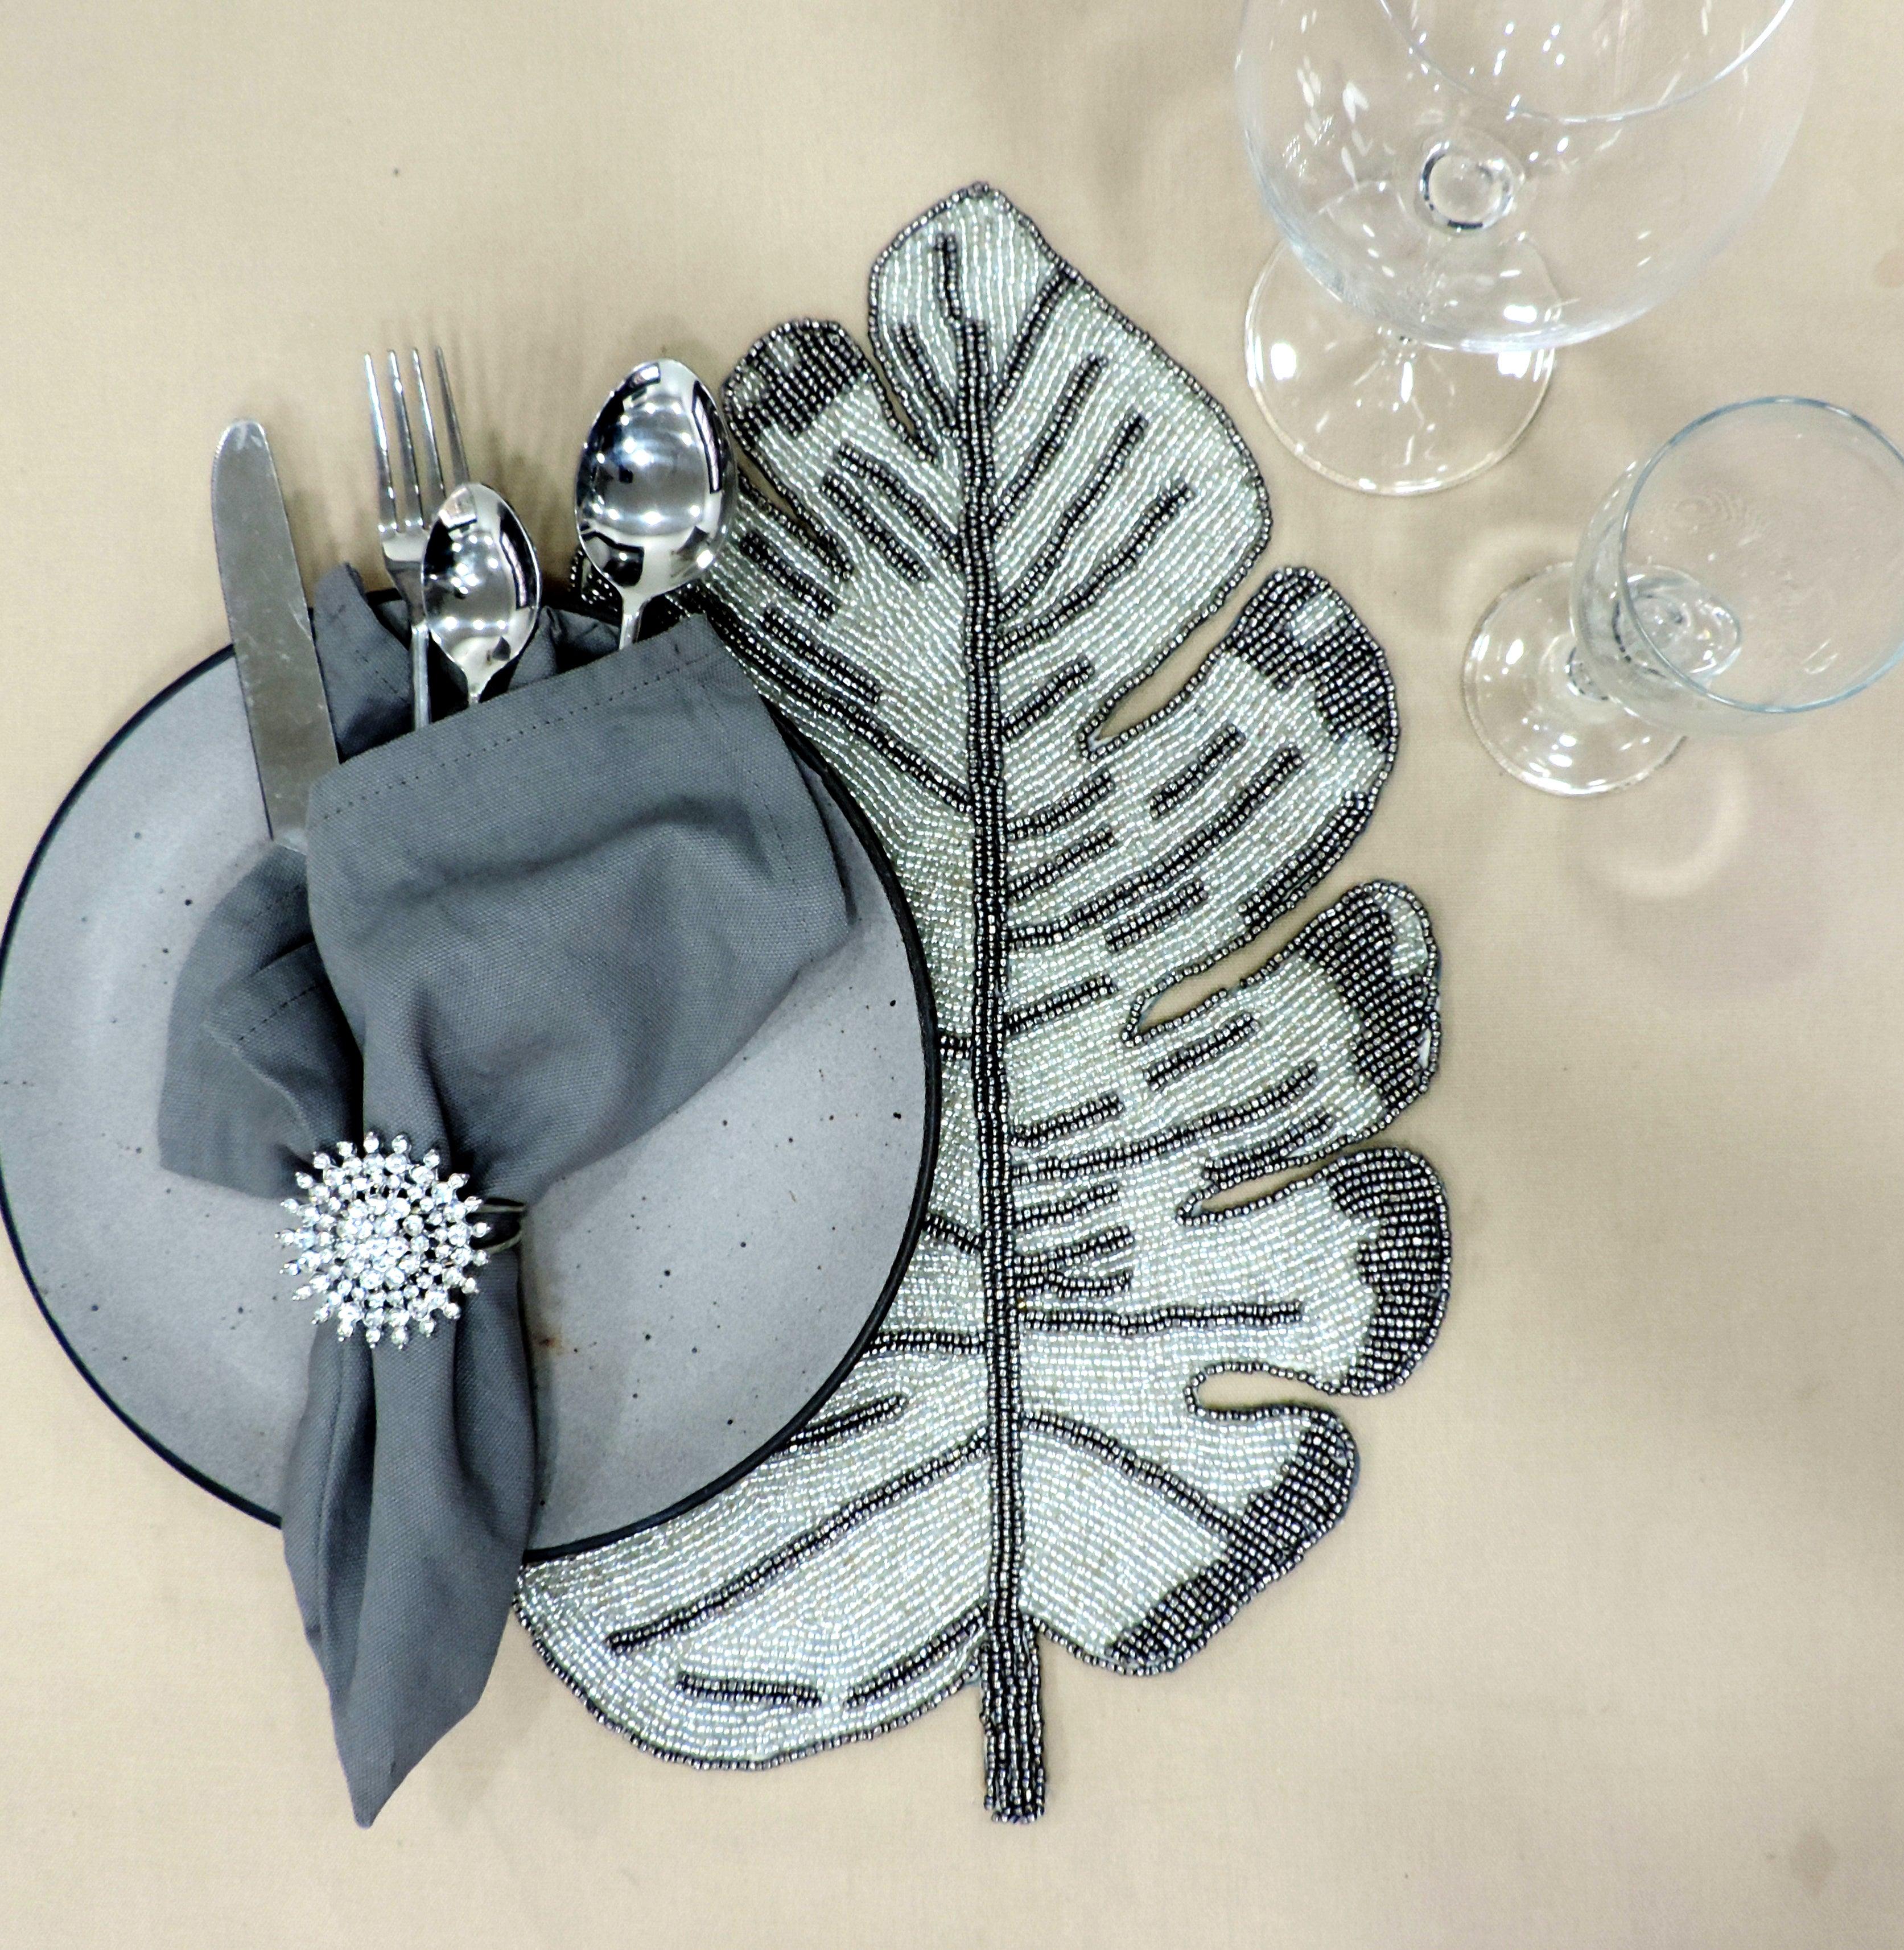 The 'Twilight' Place Setting for 4 - Placemats, Chargers, Napkin Rings & Table Runner - trunkin.in